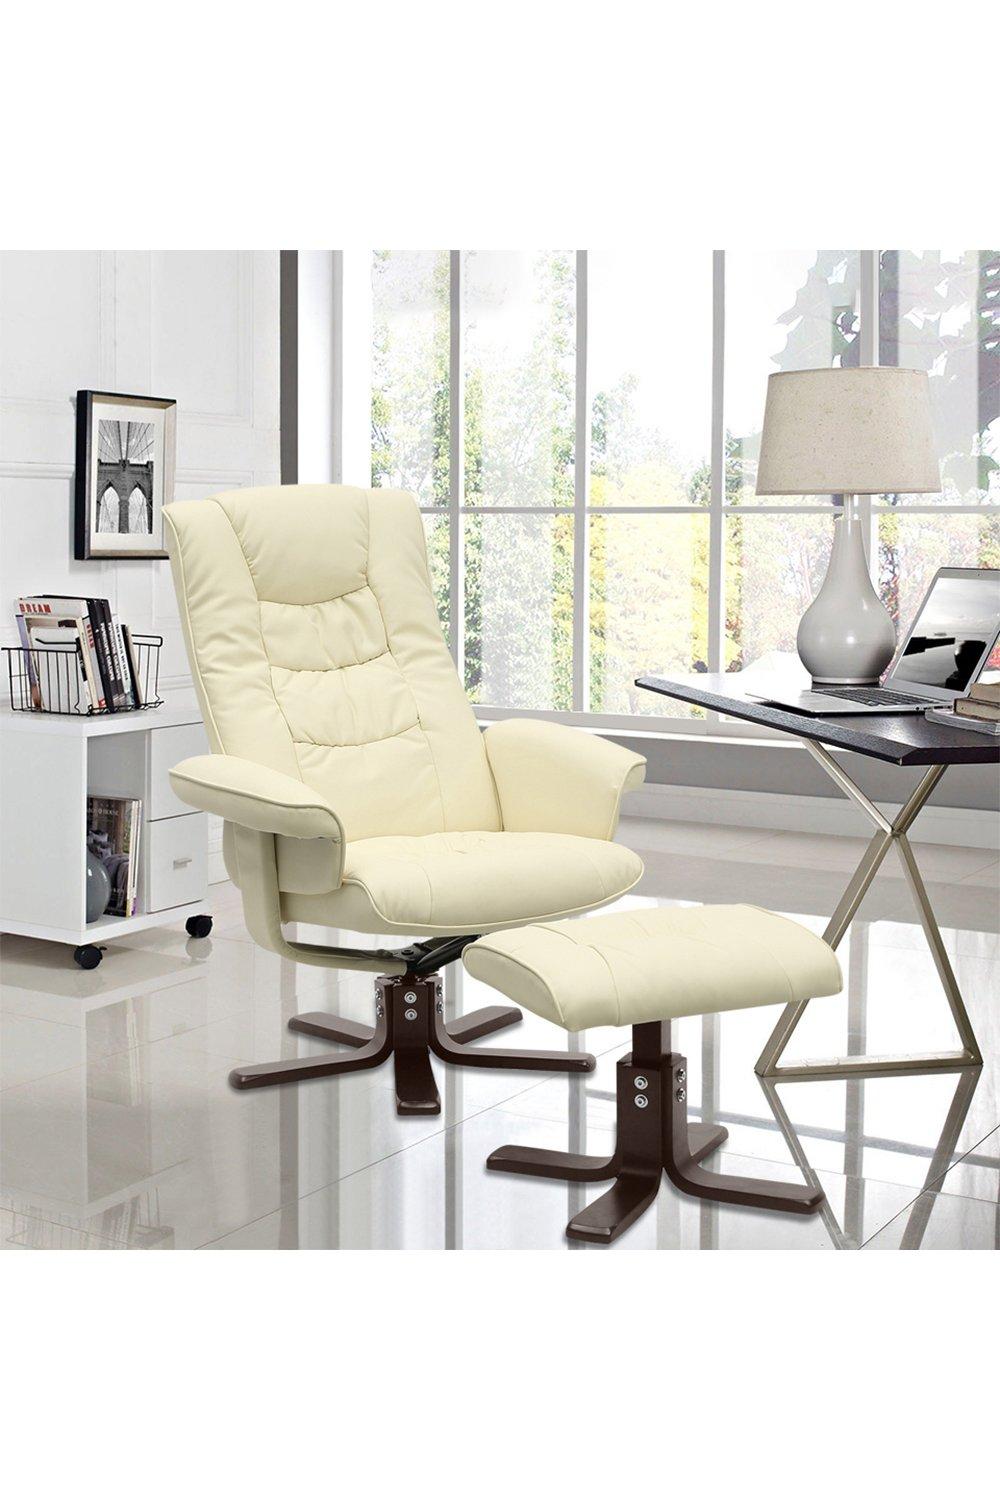 PU Leather Swivel Chair Recliner Armchair With Footstool